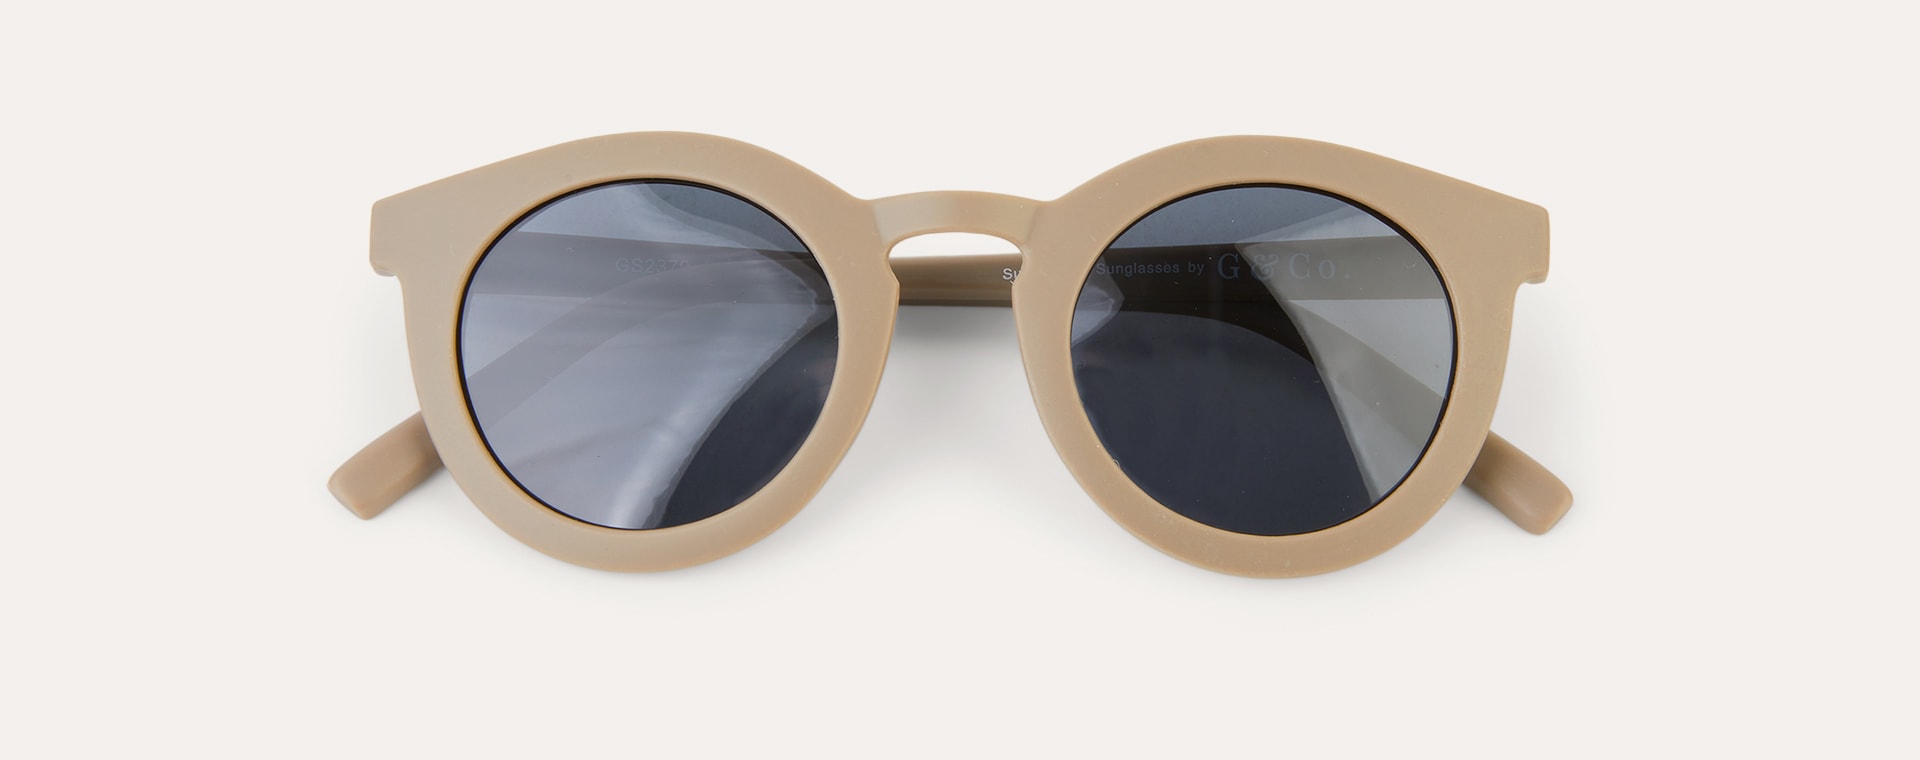 Stone Grech & Co New Sustainable Sunglasses